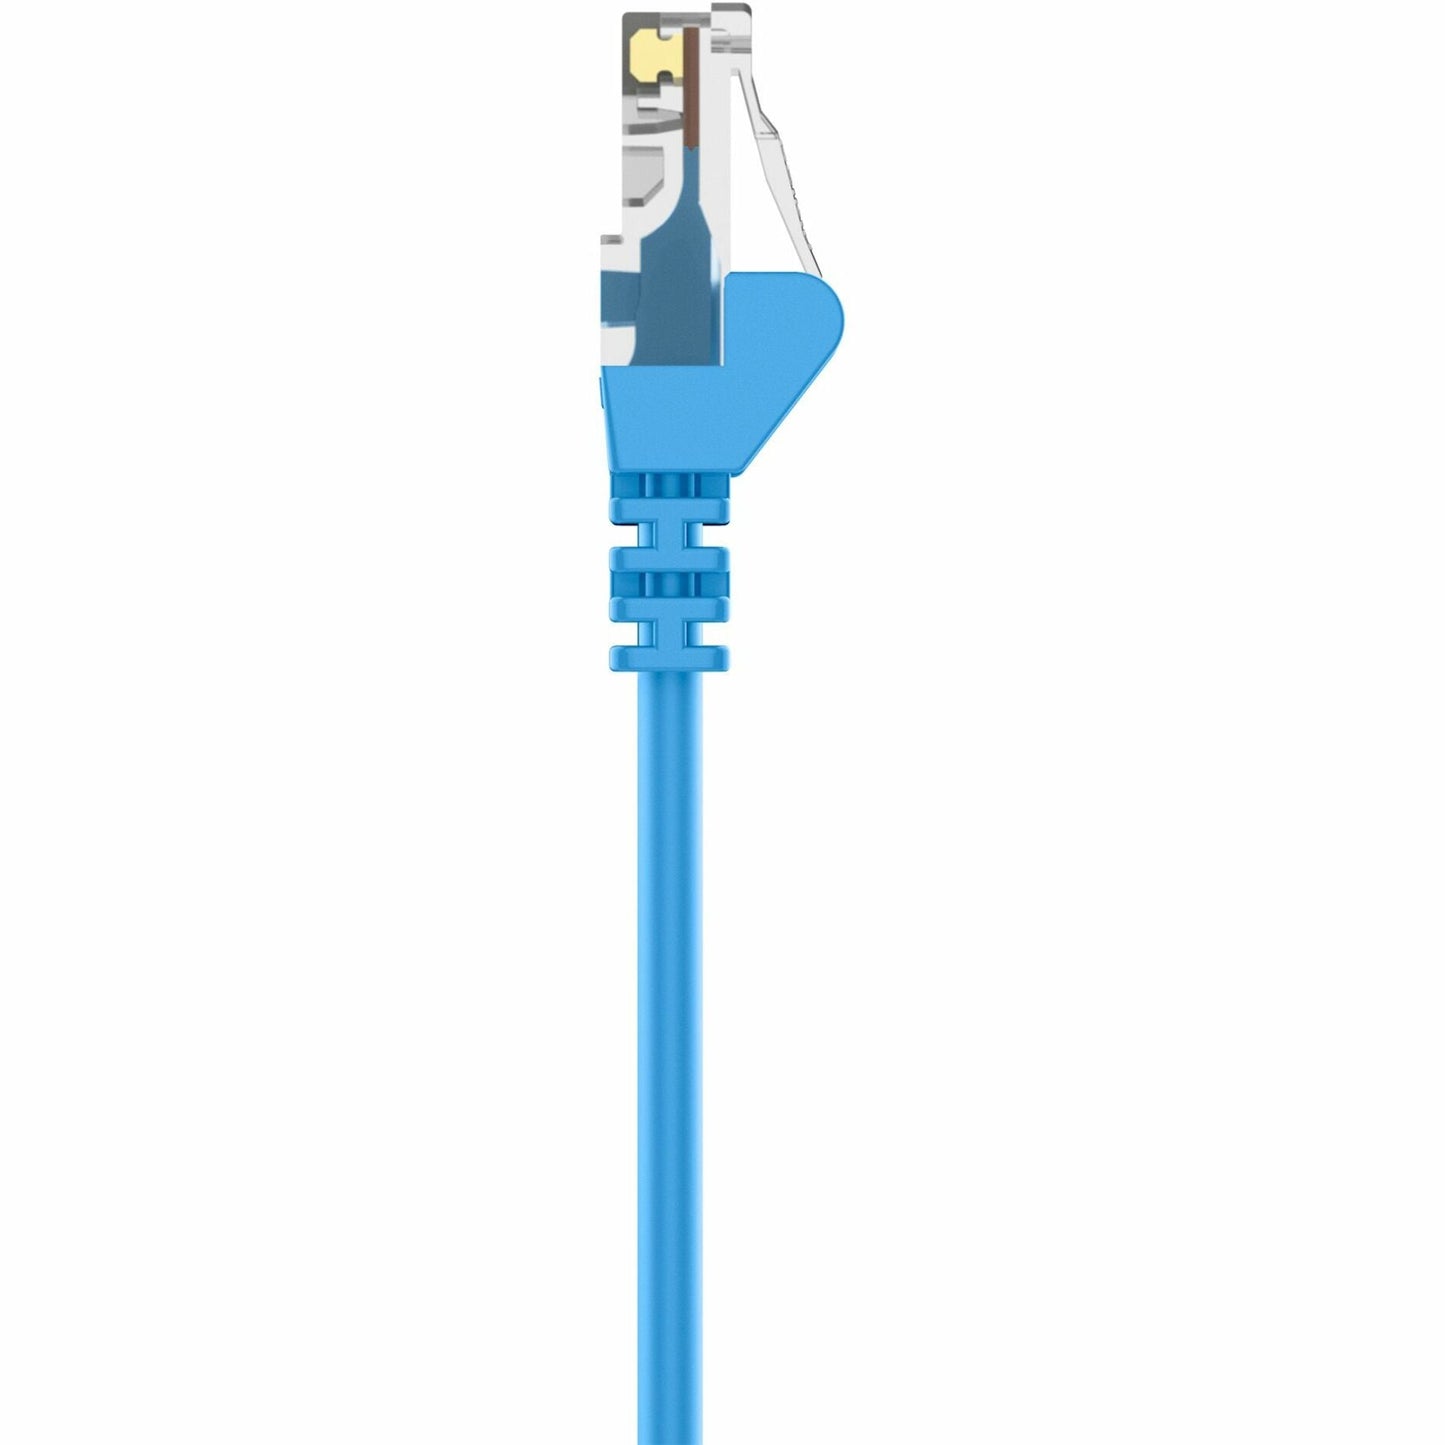 Belkin Cat5e Crossover Cable